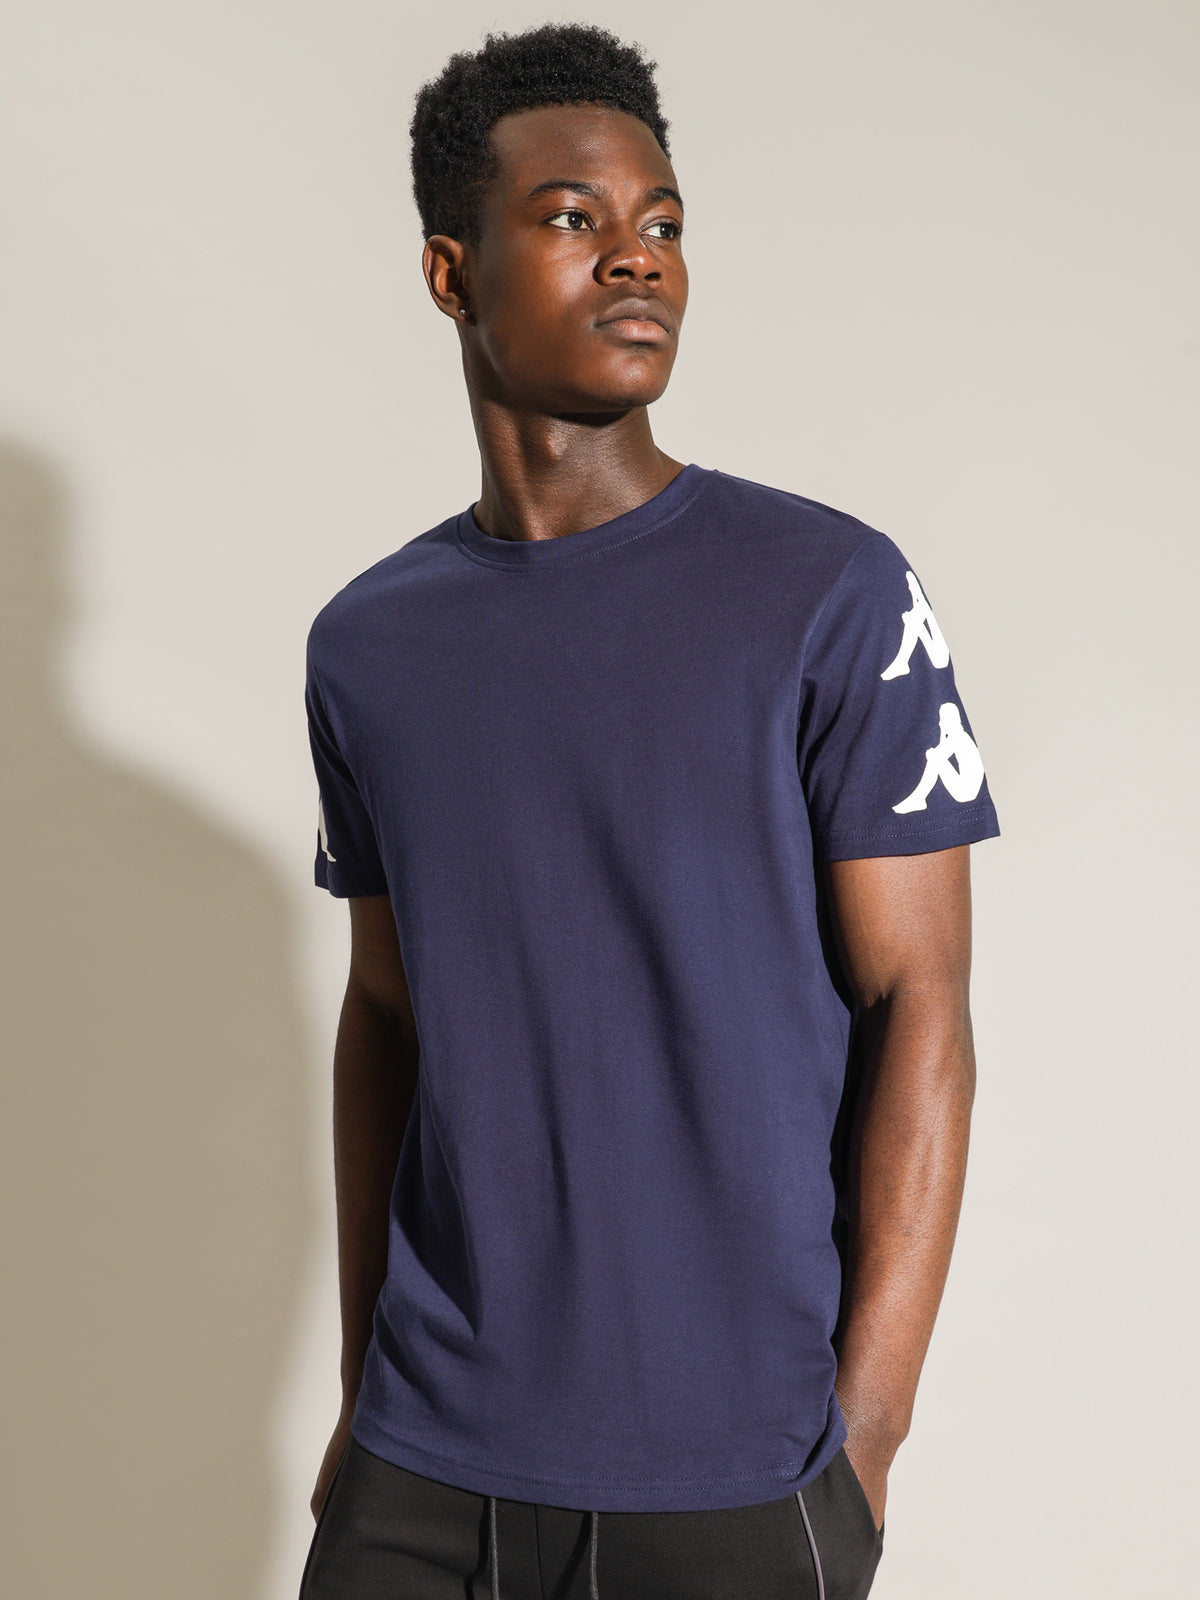 Authentic Reser T-Shirt in Navy